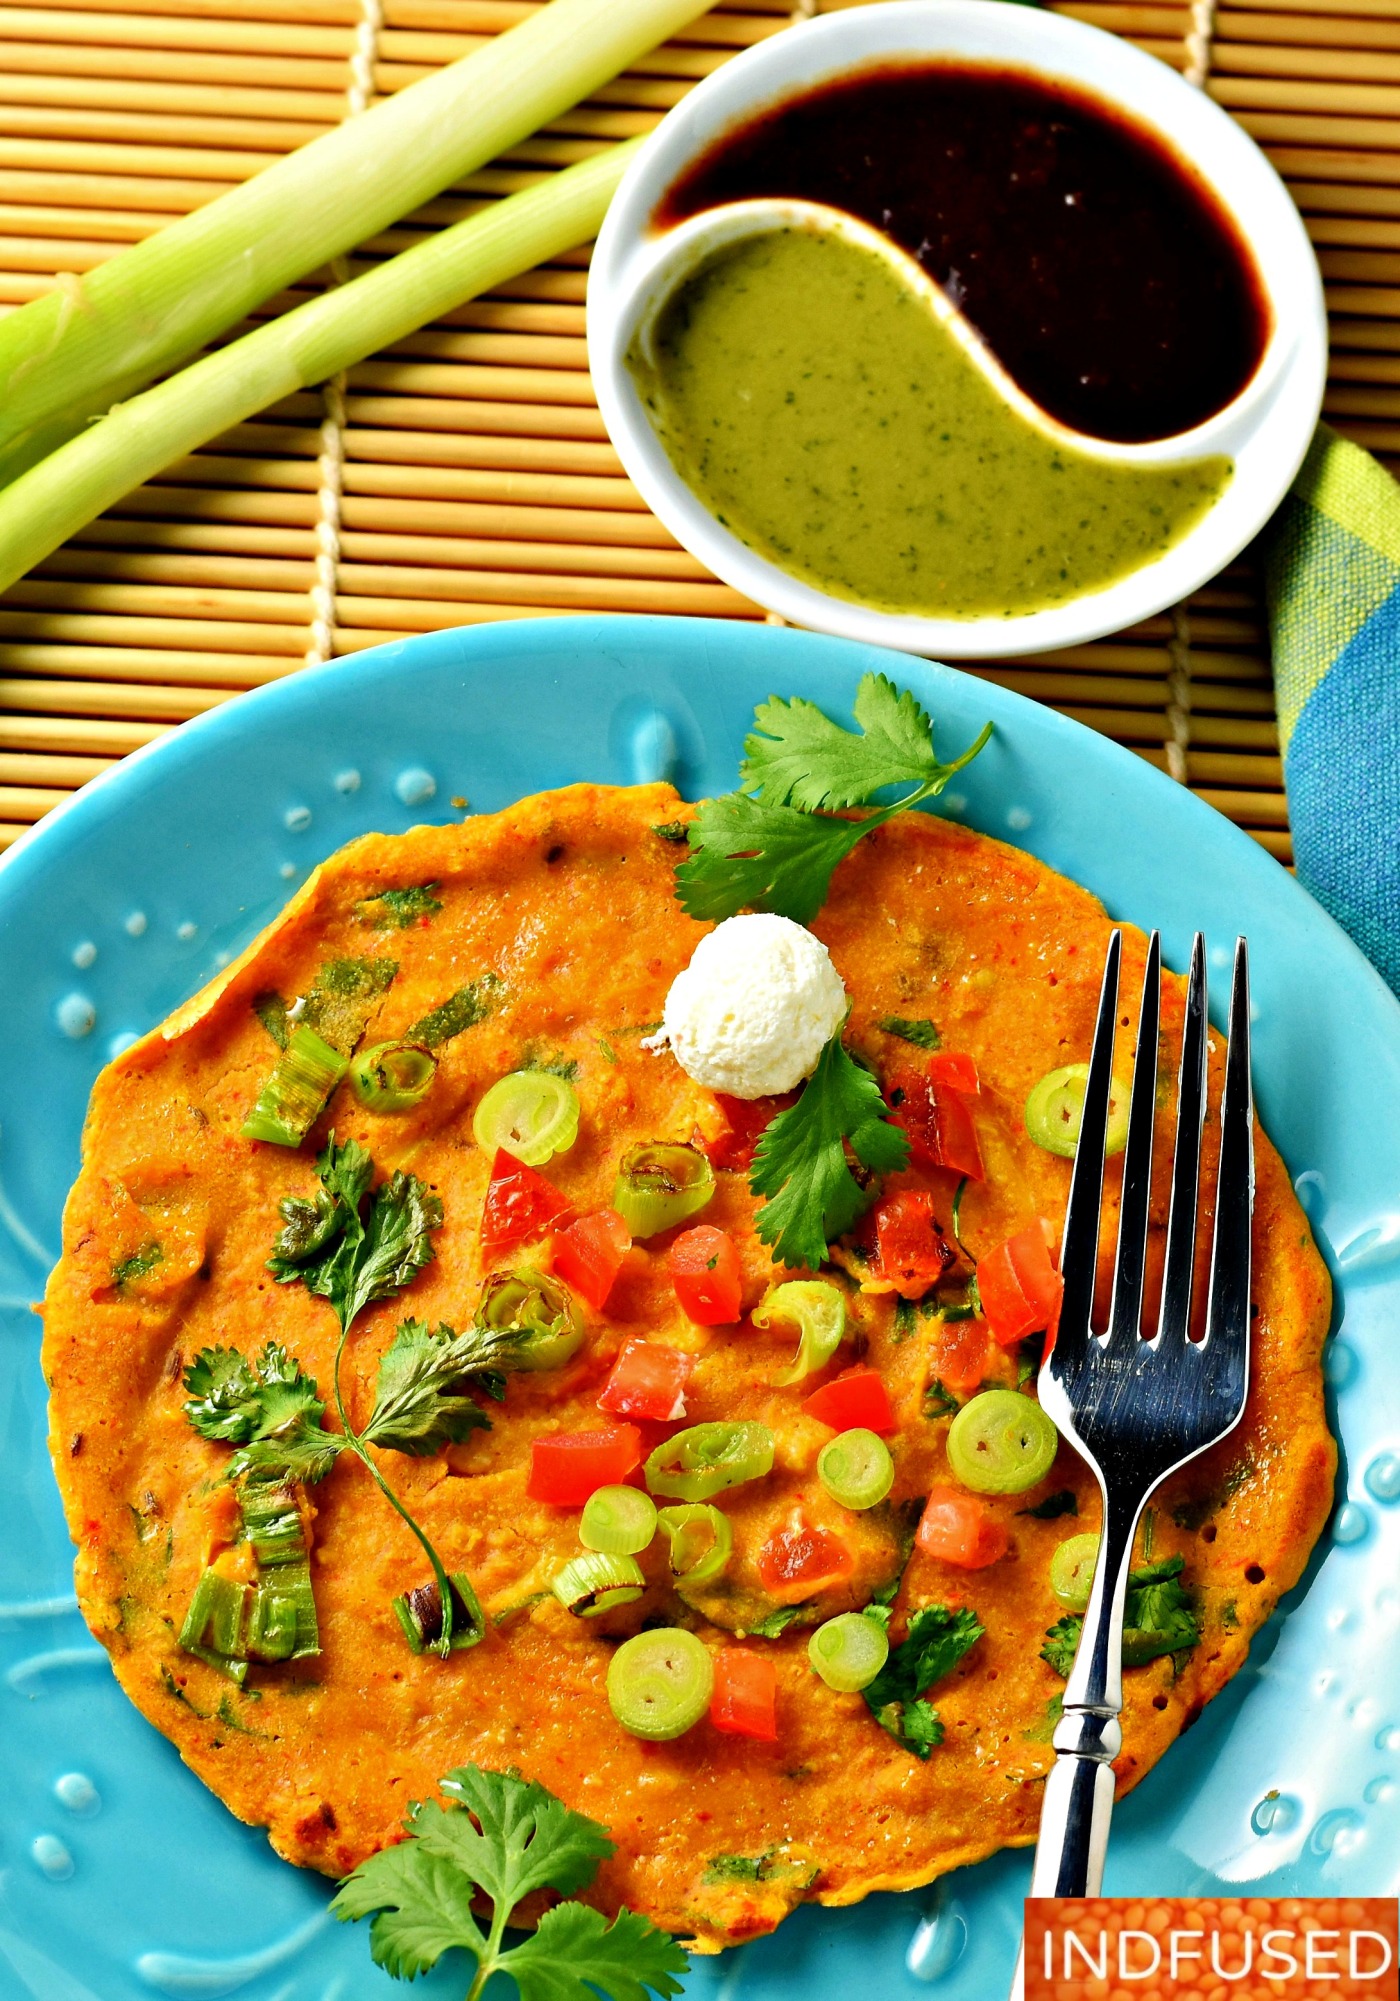 Tomato Omlette with Oats and Scallions- gluten free savory, protein rich pancake, Indian fusion recipe, makes 8 pancakes. Easy vegetarian weekday meal!